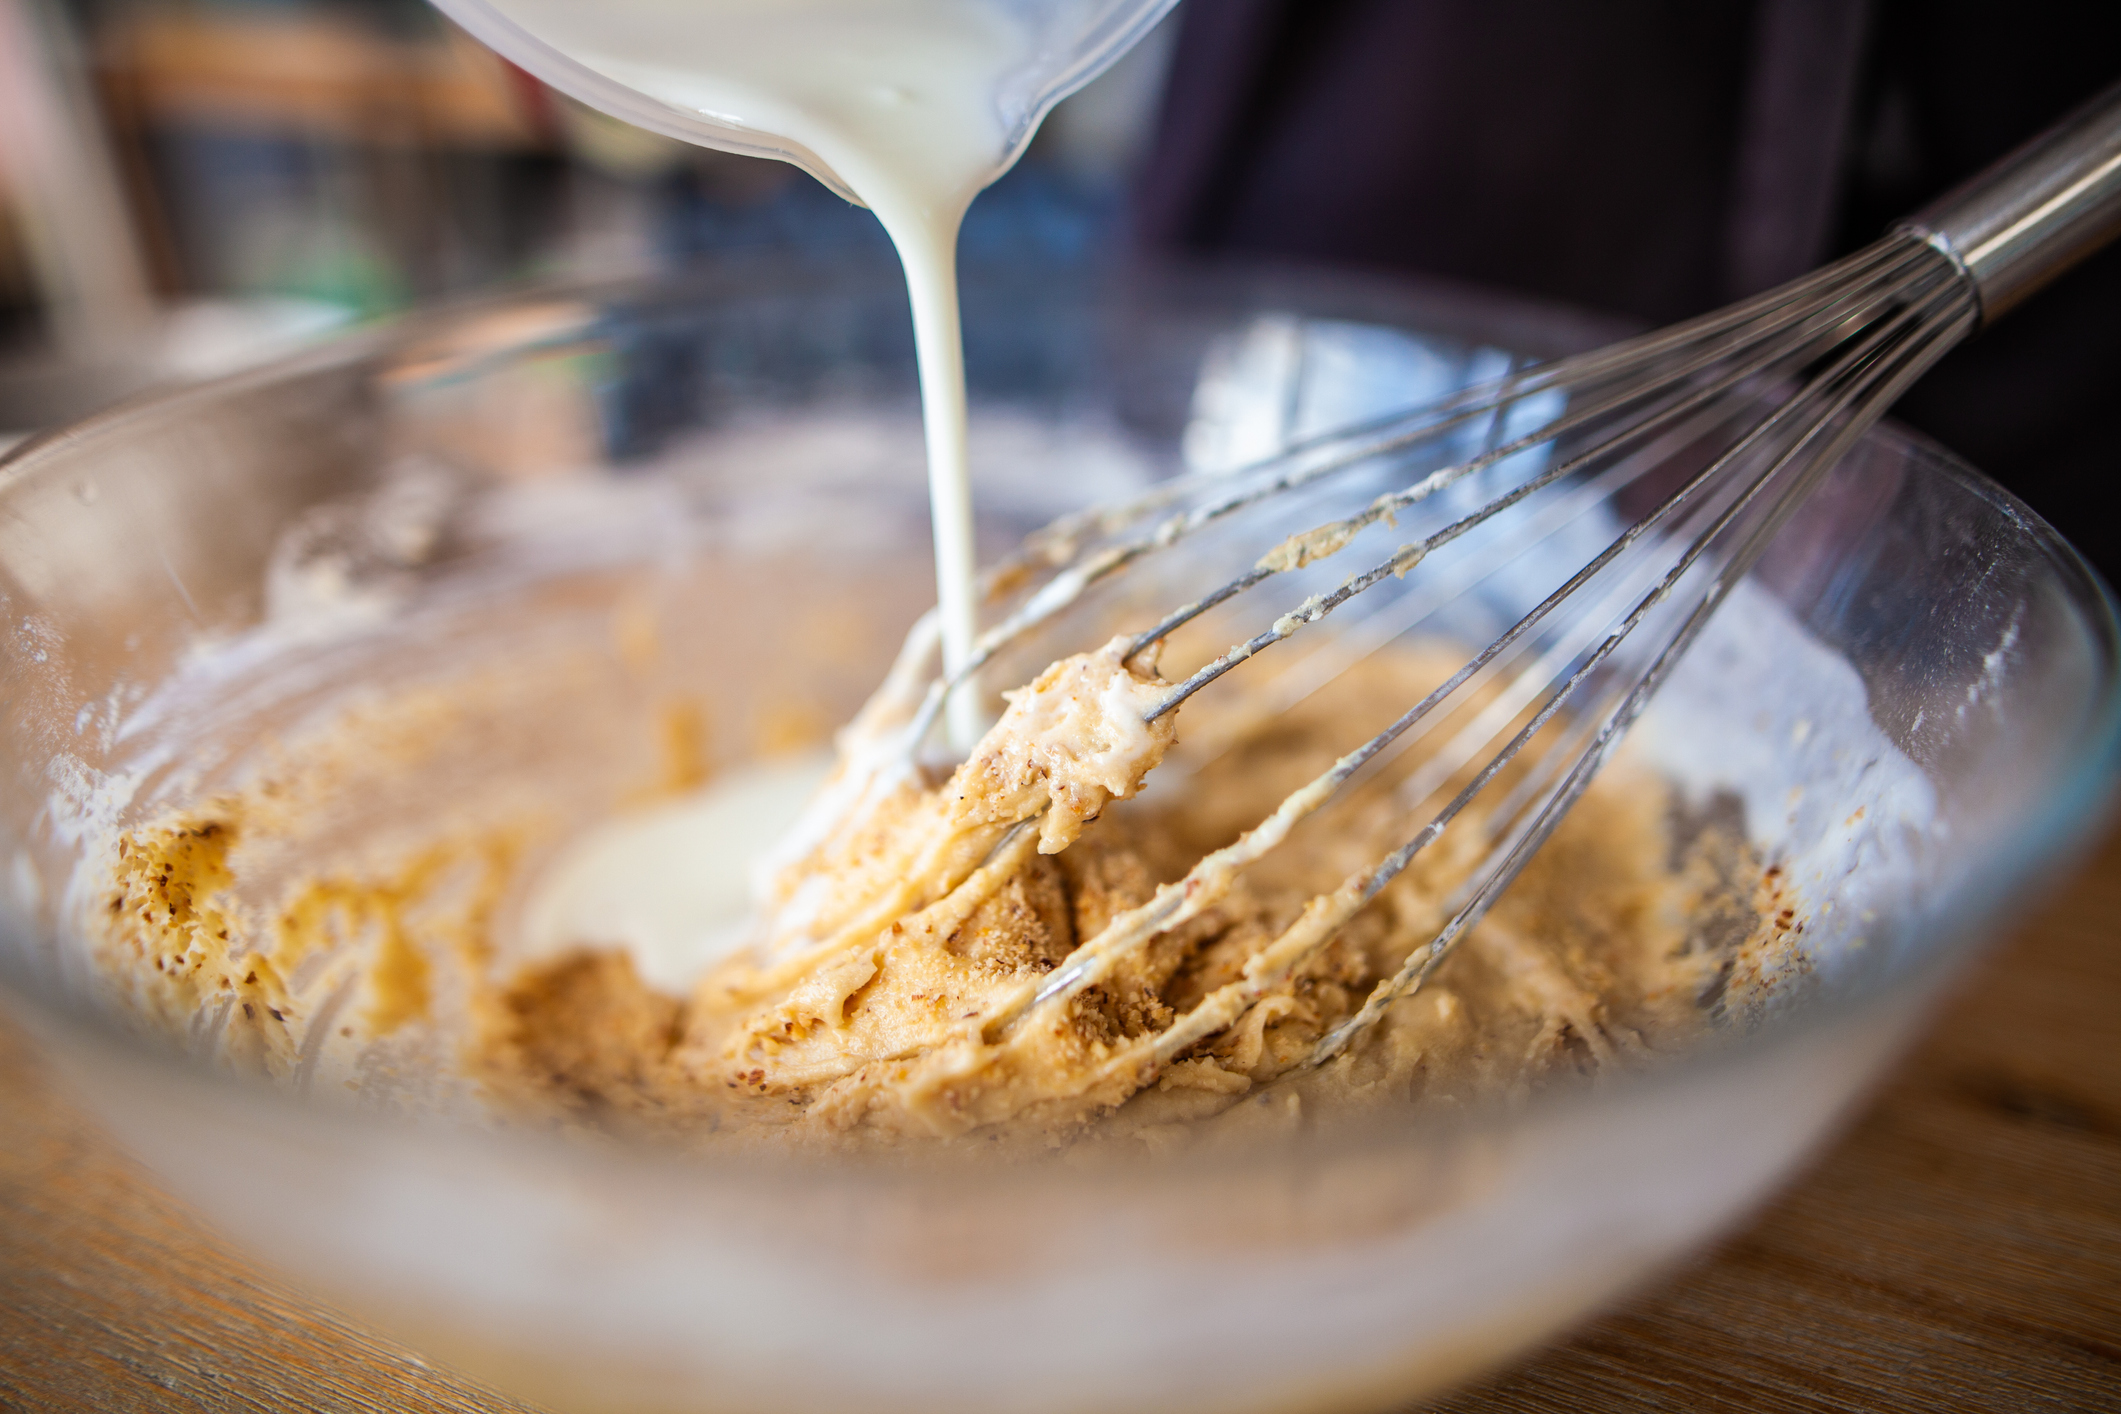 Cups to Grams Conversions for Common Baking Ingredients - Home